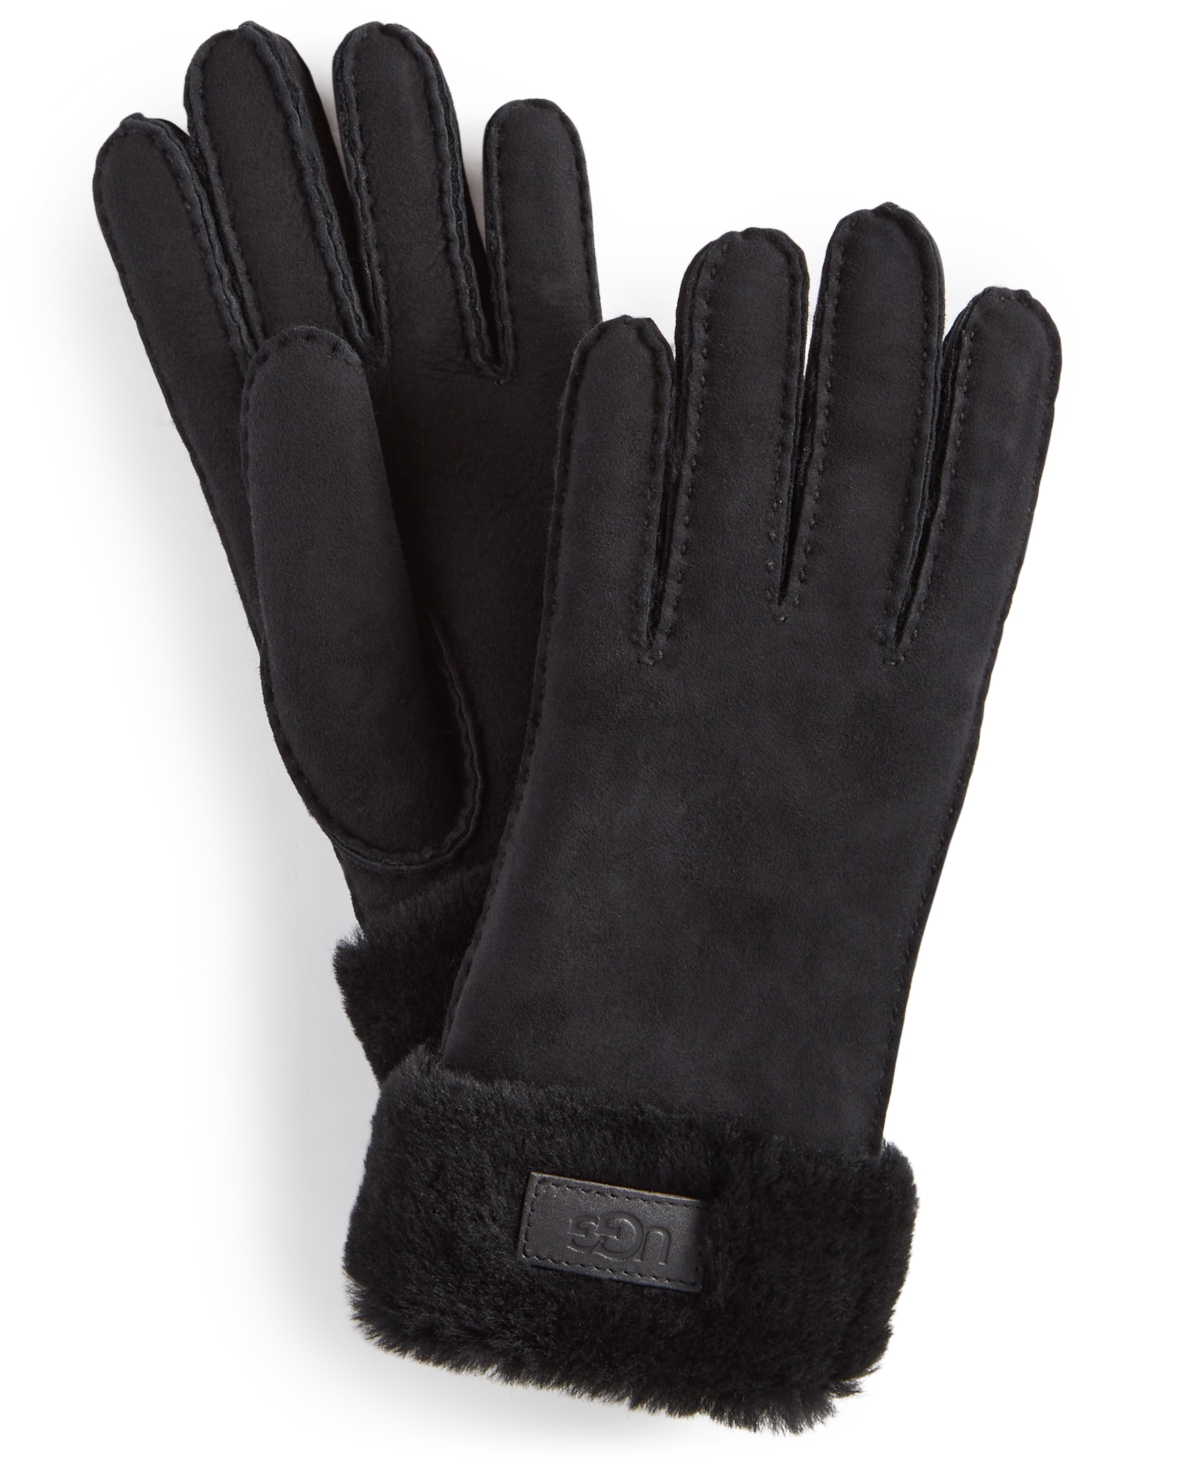 UGG WOMEN'S WATER-RESISTANT TURN-CUFF SHEARLING GLOVES